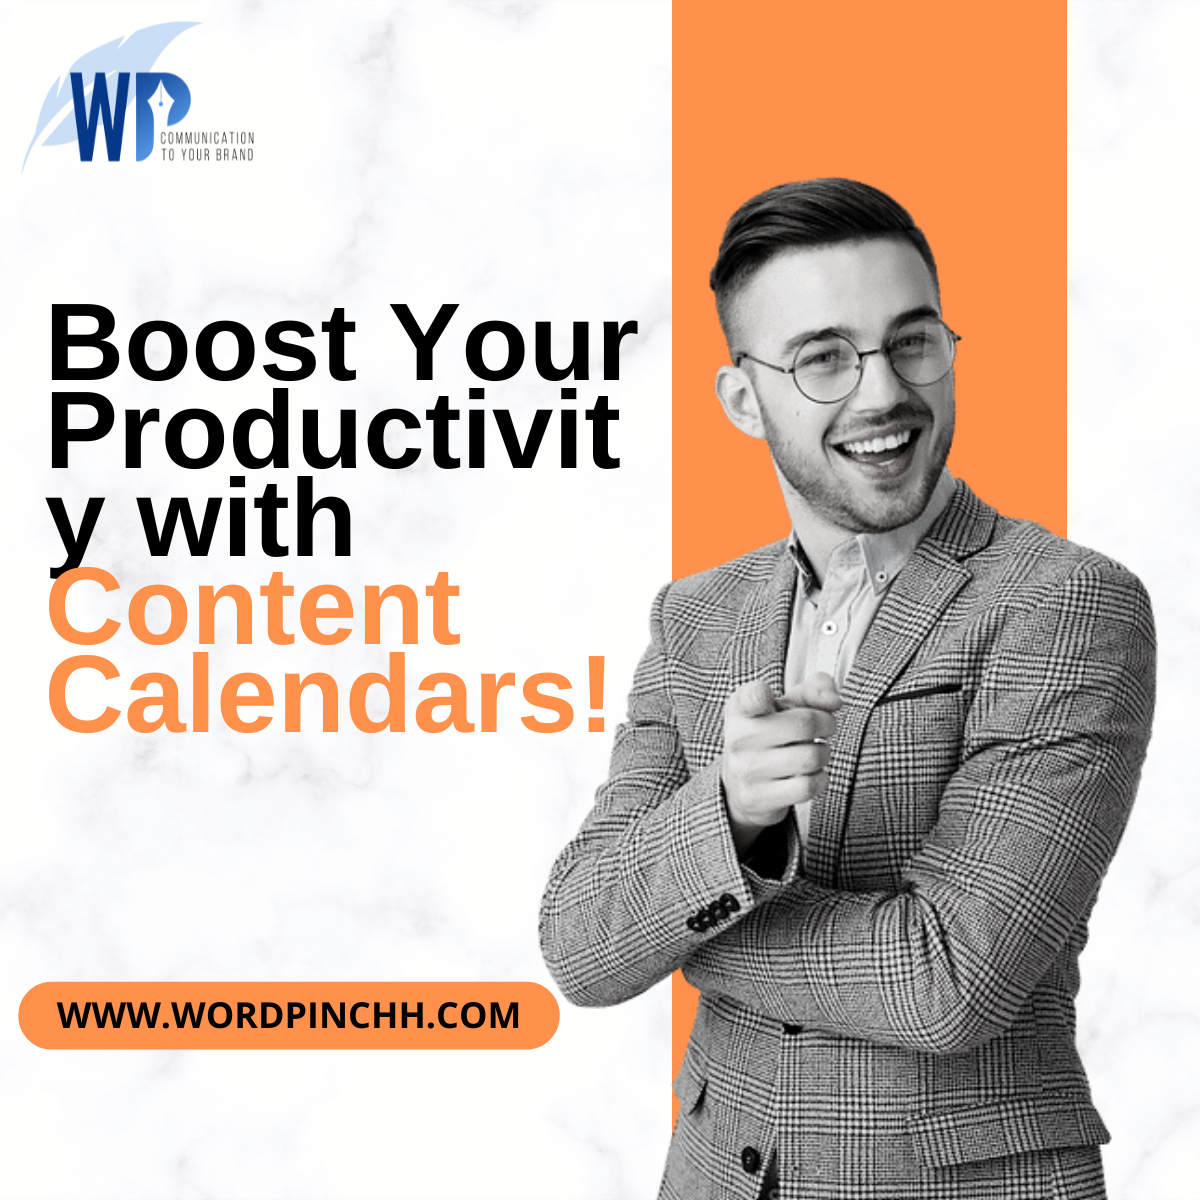 Boost Your Productivity with Content Calendars!